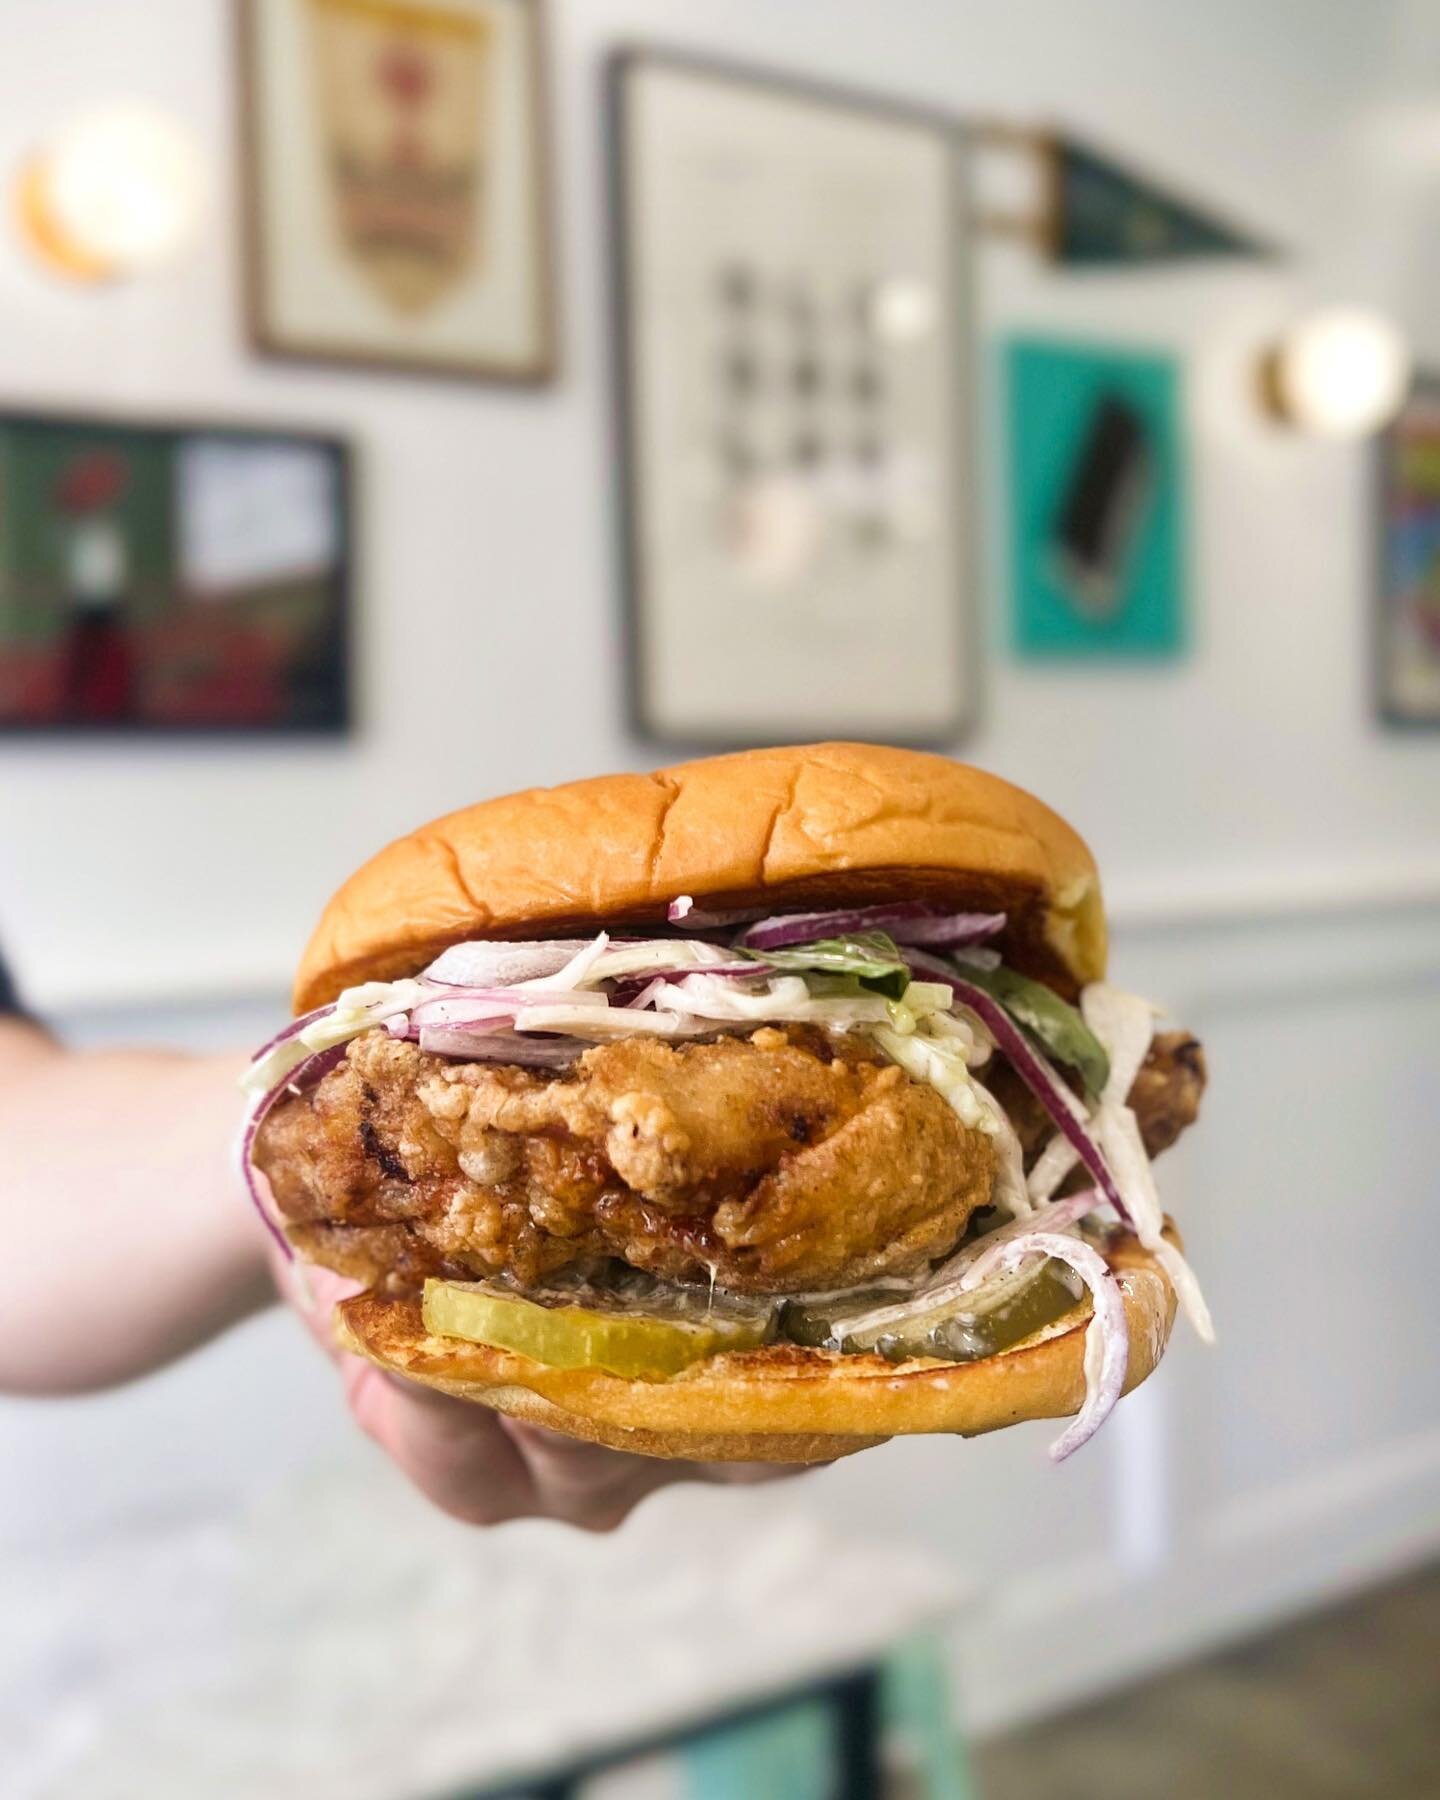 🍔 Introducing our mouthwatering masterpiece: the 5-Spice Basil Chicken Sando - available for a limited time only and in limited quantities. Featuring buttermilk chicken thigh, Taiwanese 5-spice seasoning, house-made coleslaw, Thai basil, zesty pickl